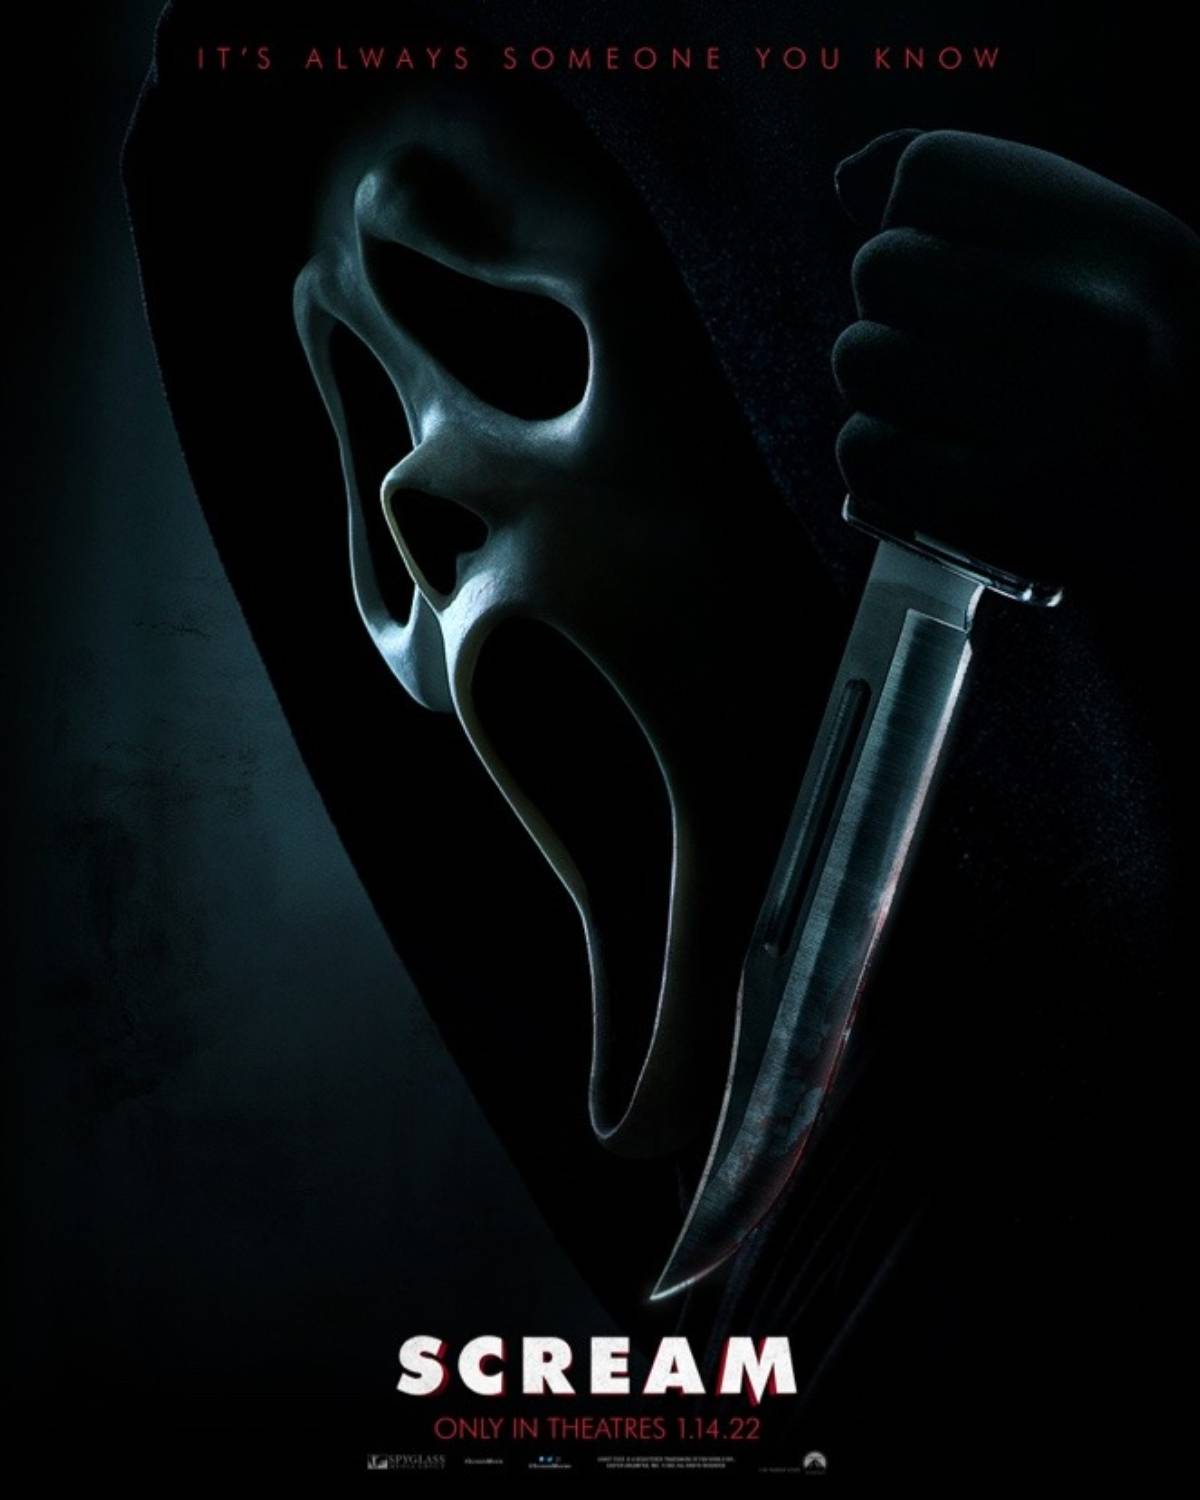 SCREAM 5 Poster Reveals the New Ghostface in Menacing Fashion